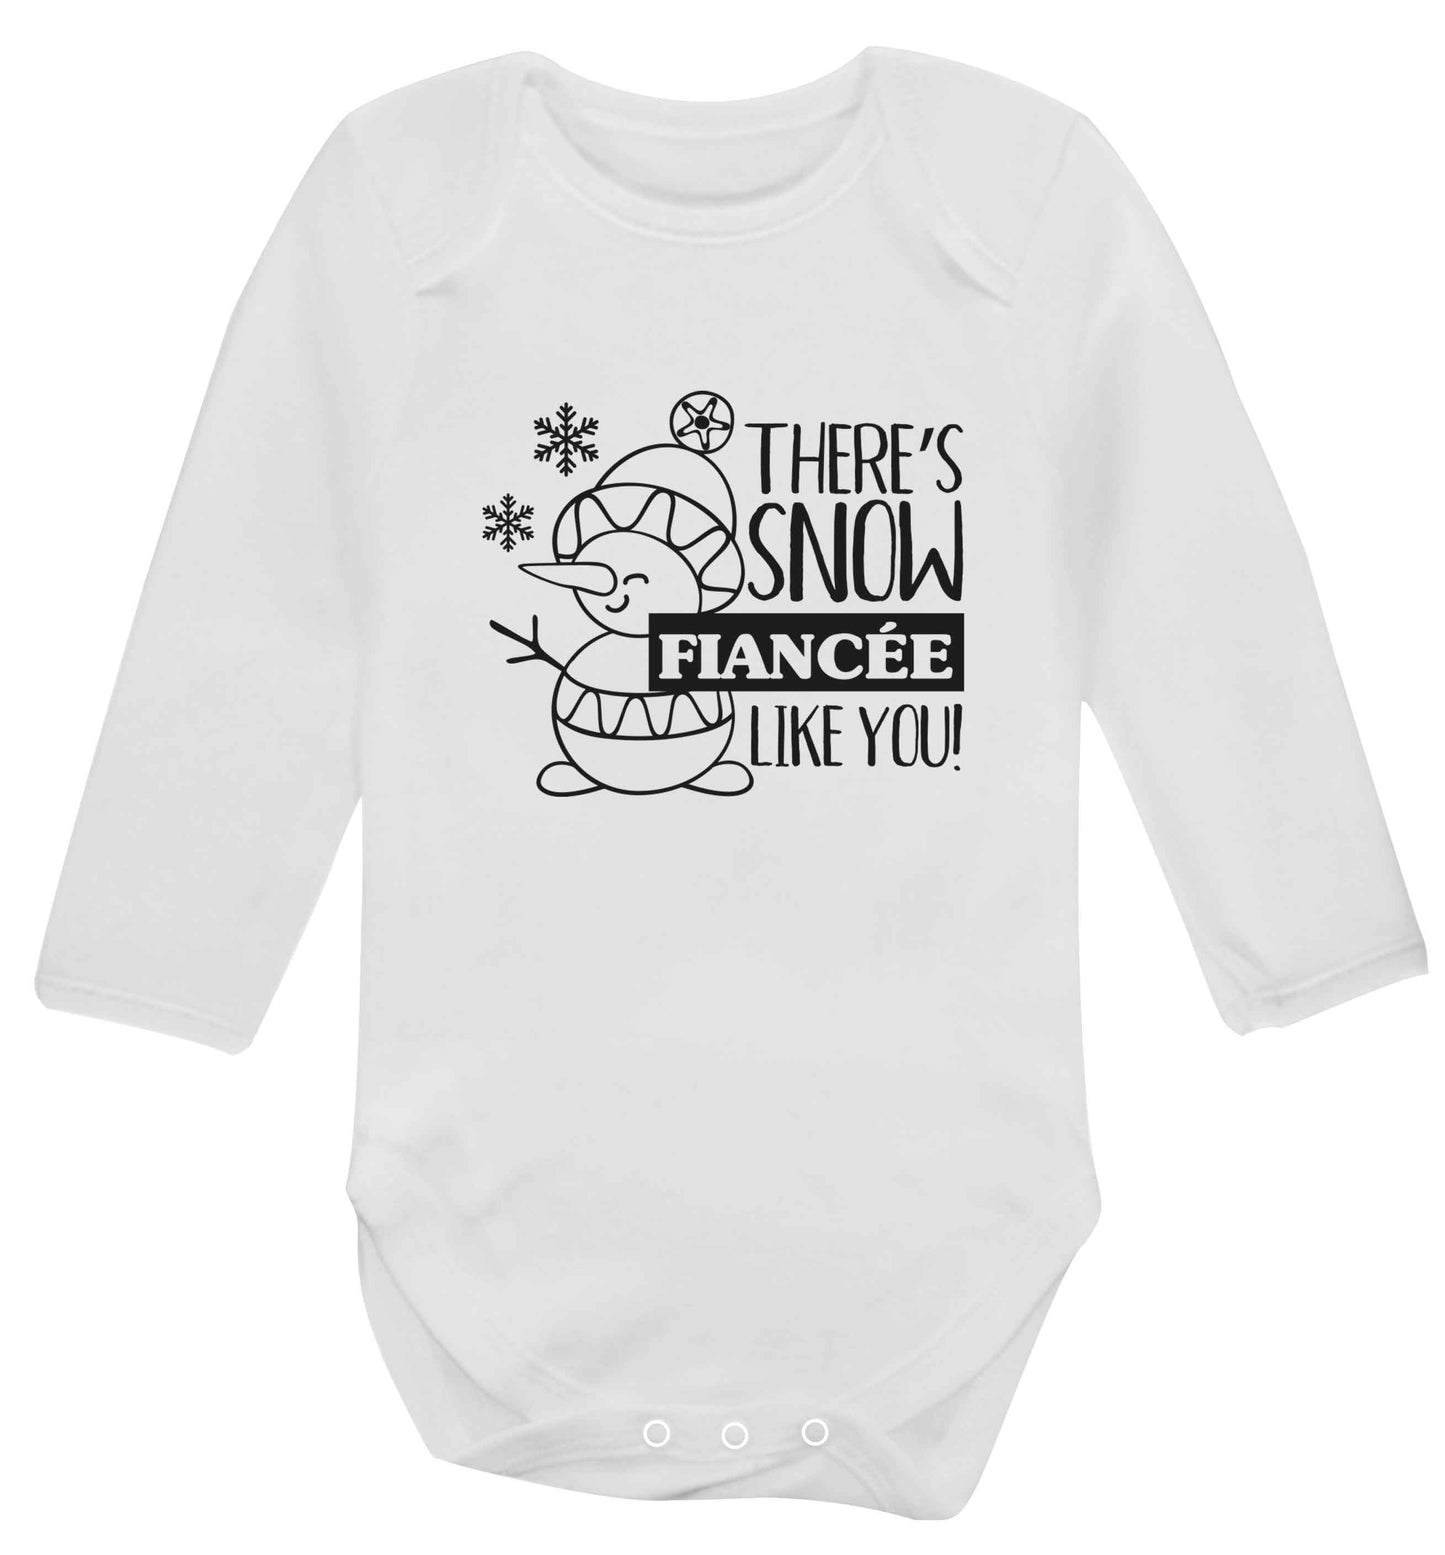 There's snow fiancee like you baby vest long sleeved white 6-12 months